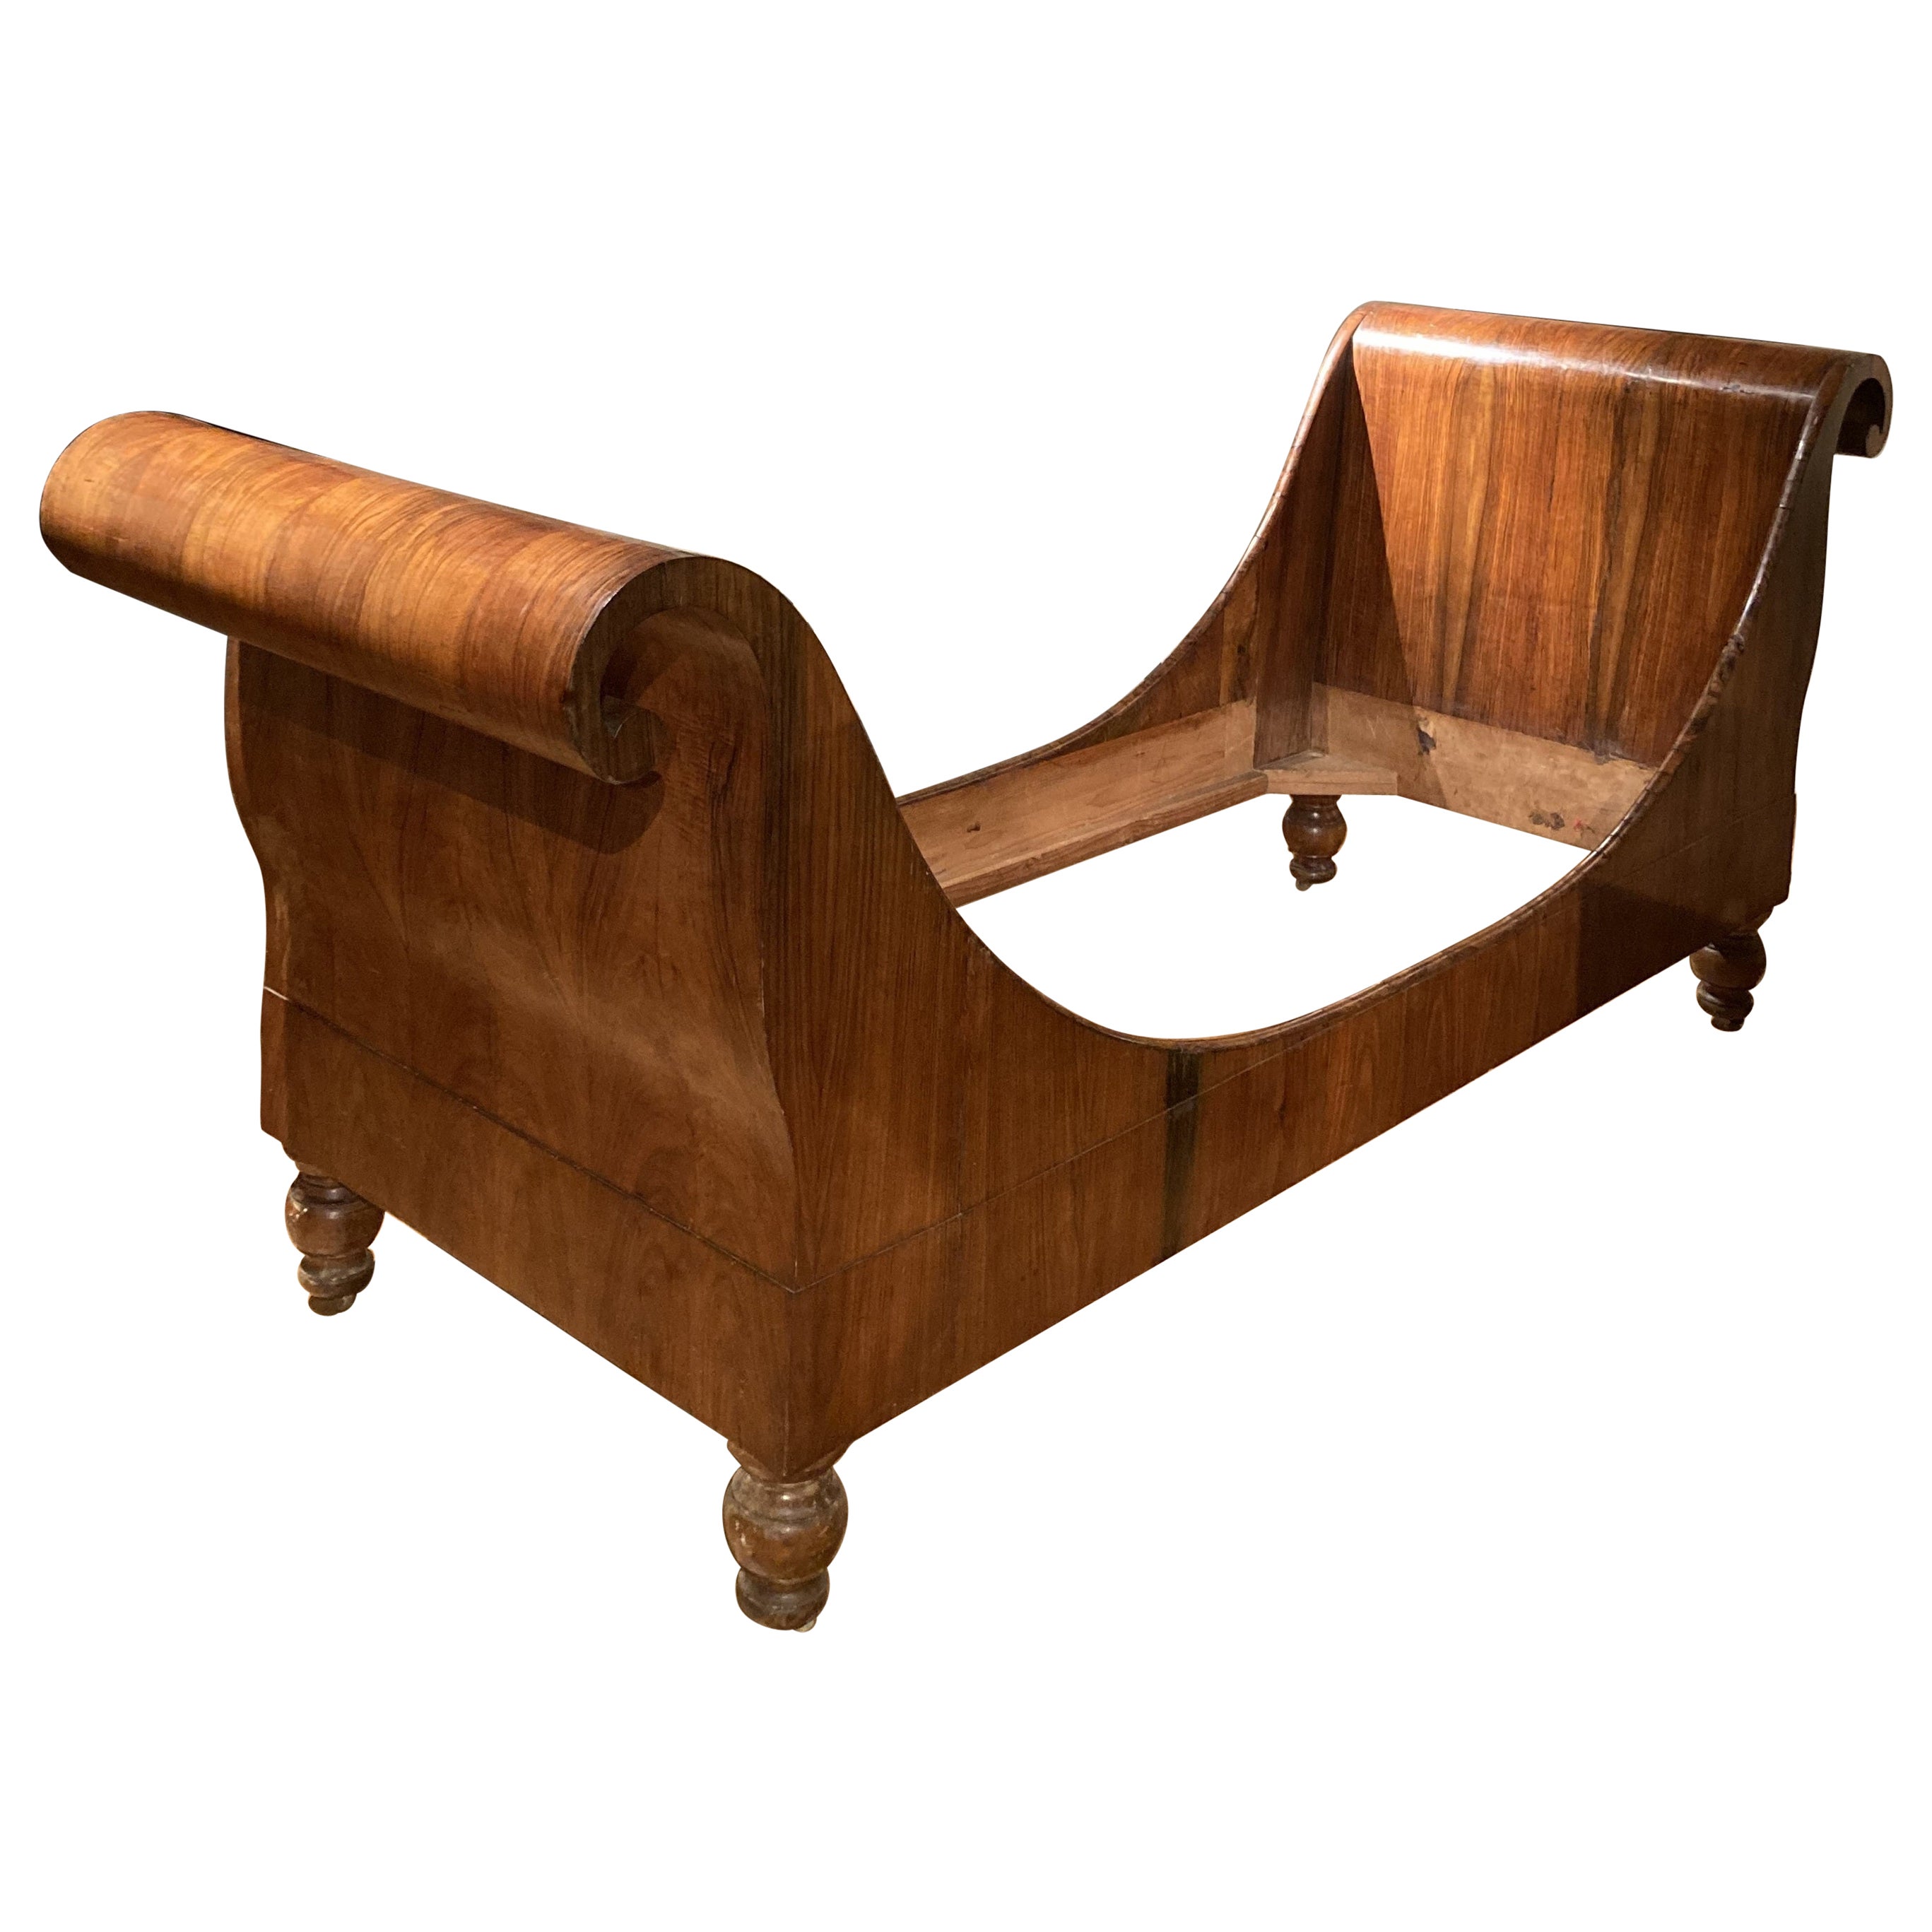 19th Century Italian Empire Period Flamed Walnut Two Sleigh Beds or Daybeds For Sale